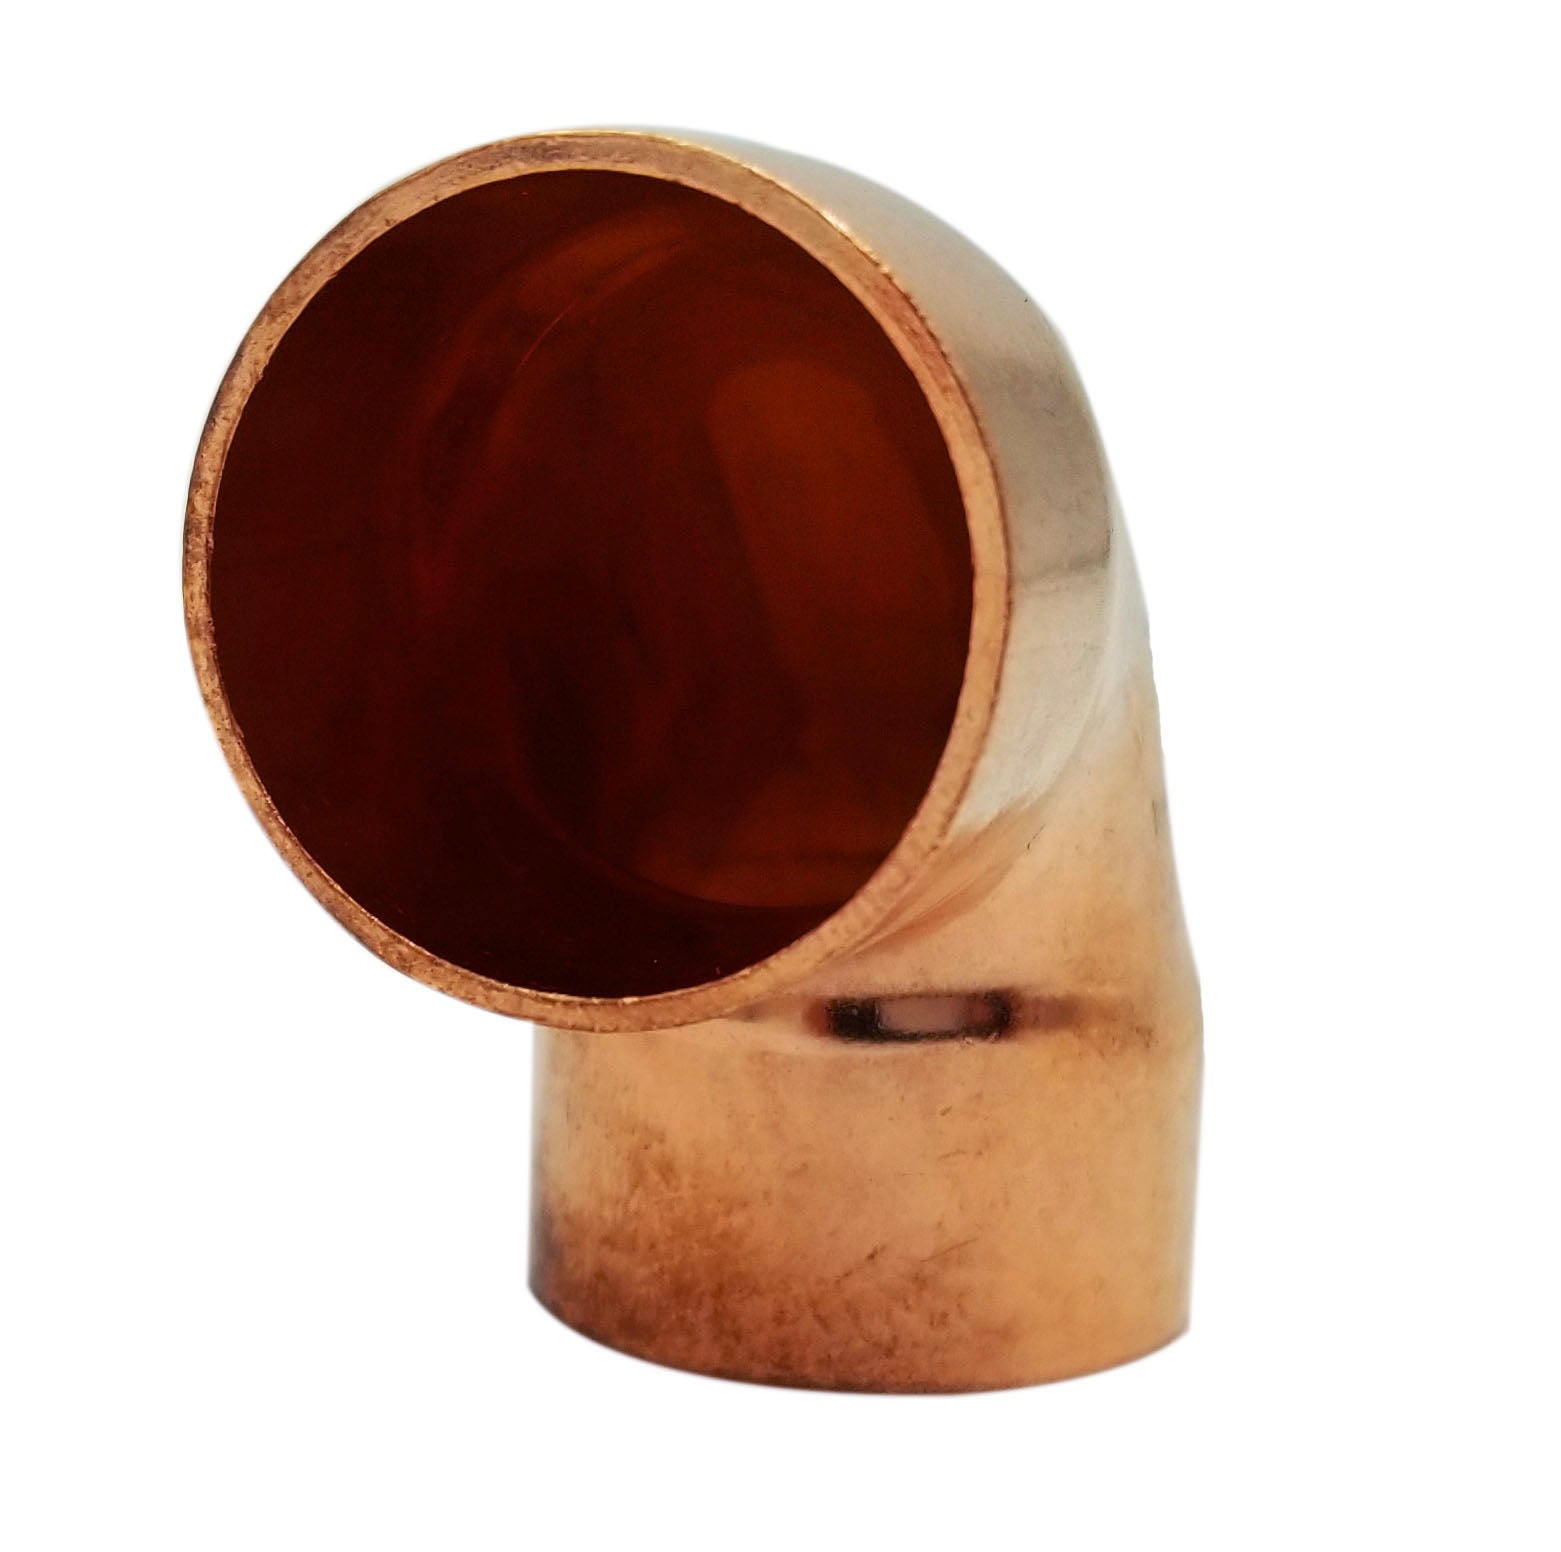 Copper Fitting 1/2 Inch (HVAC Outer Dimension) 3/8 Inch (Plumbing Inner Dimension) - Copper 90 Degree Elbow Fitting Connector - 99.9% Pure Copper - 10 Pack